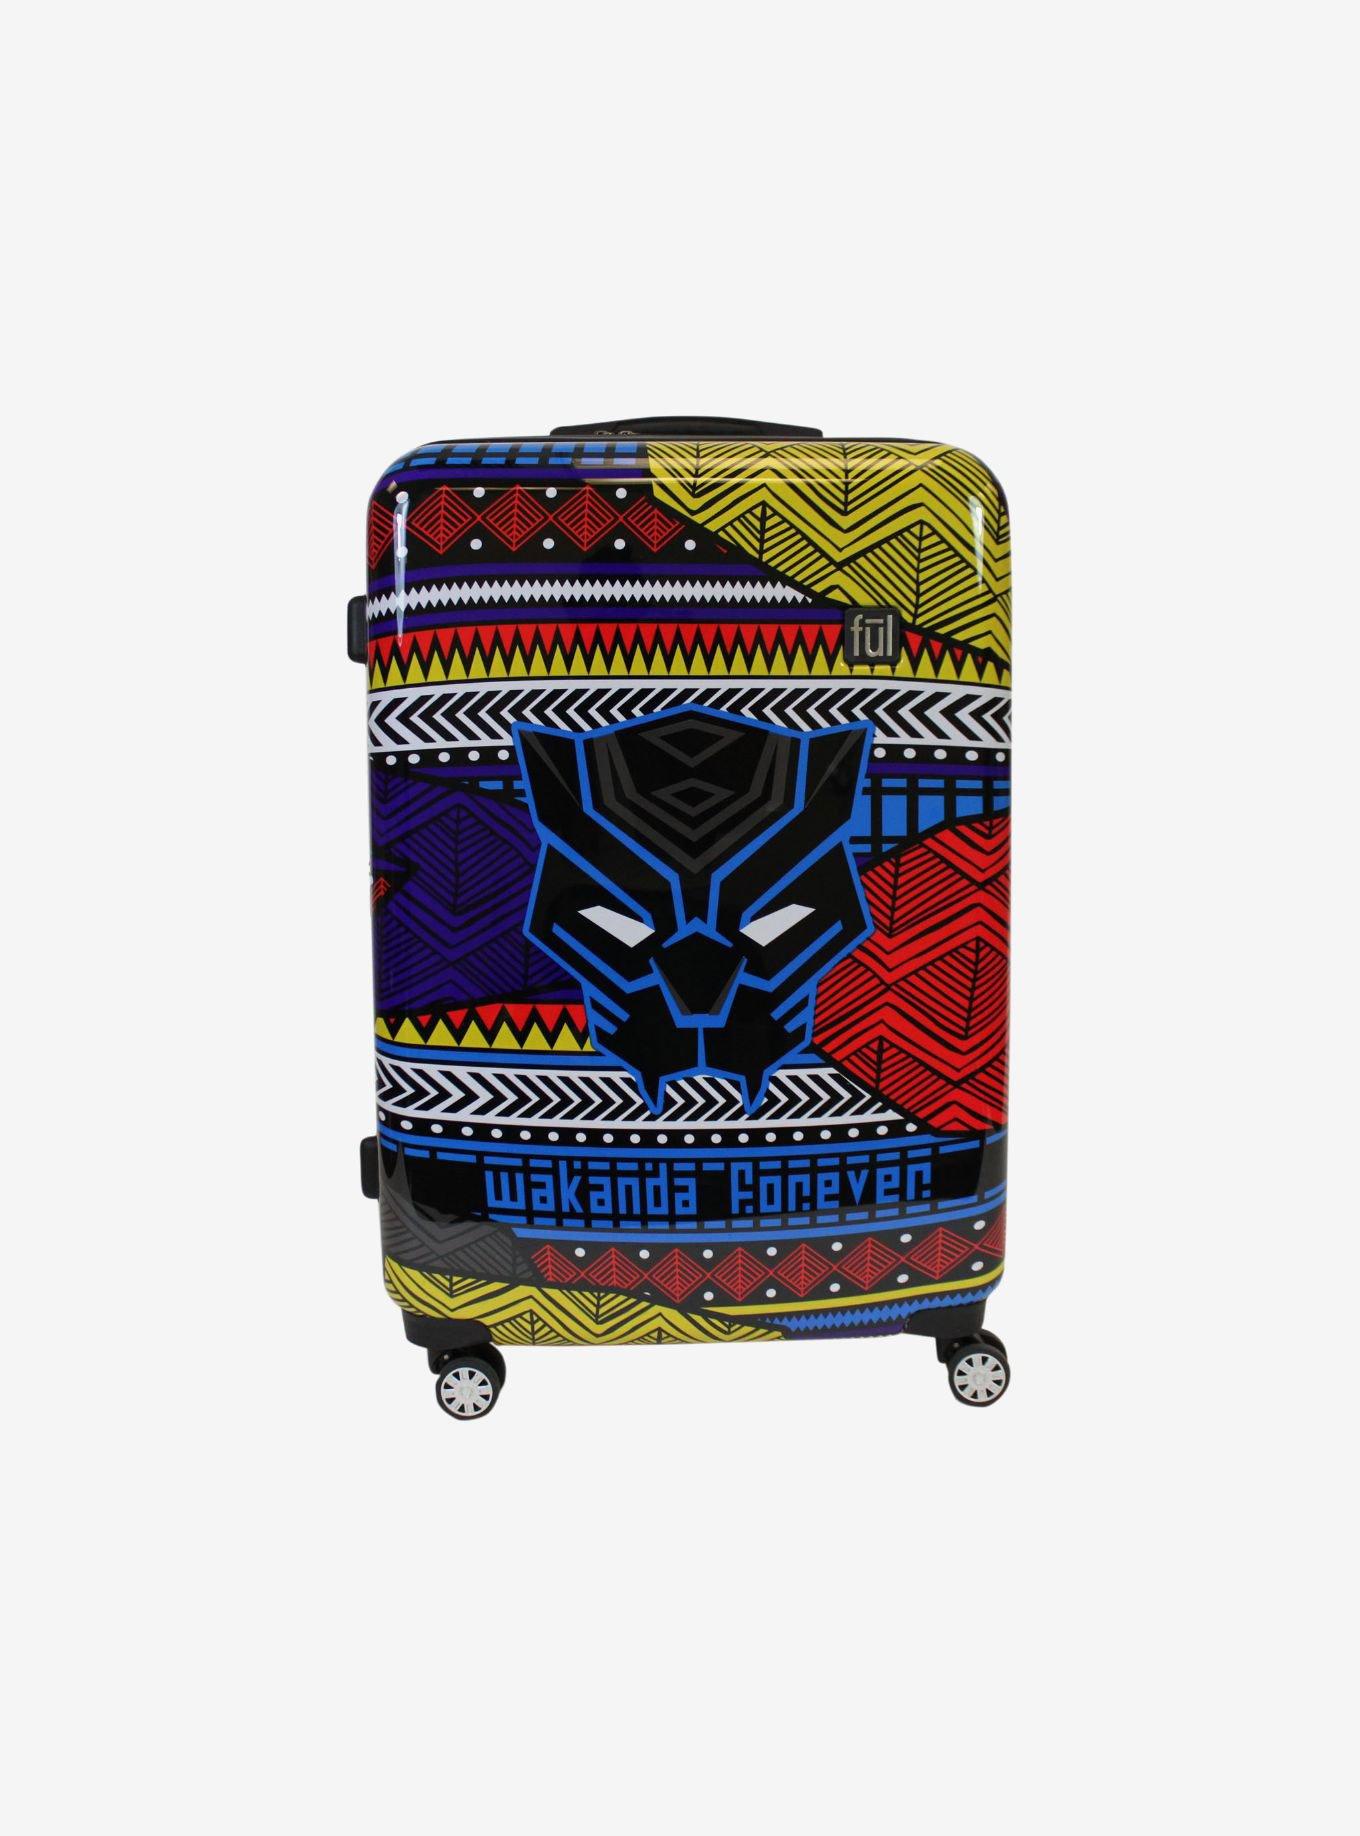 FUL Marvel Black Panther Tribal Art 25 Inch Hard Sided Rolling Luggage, , hi-res